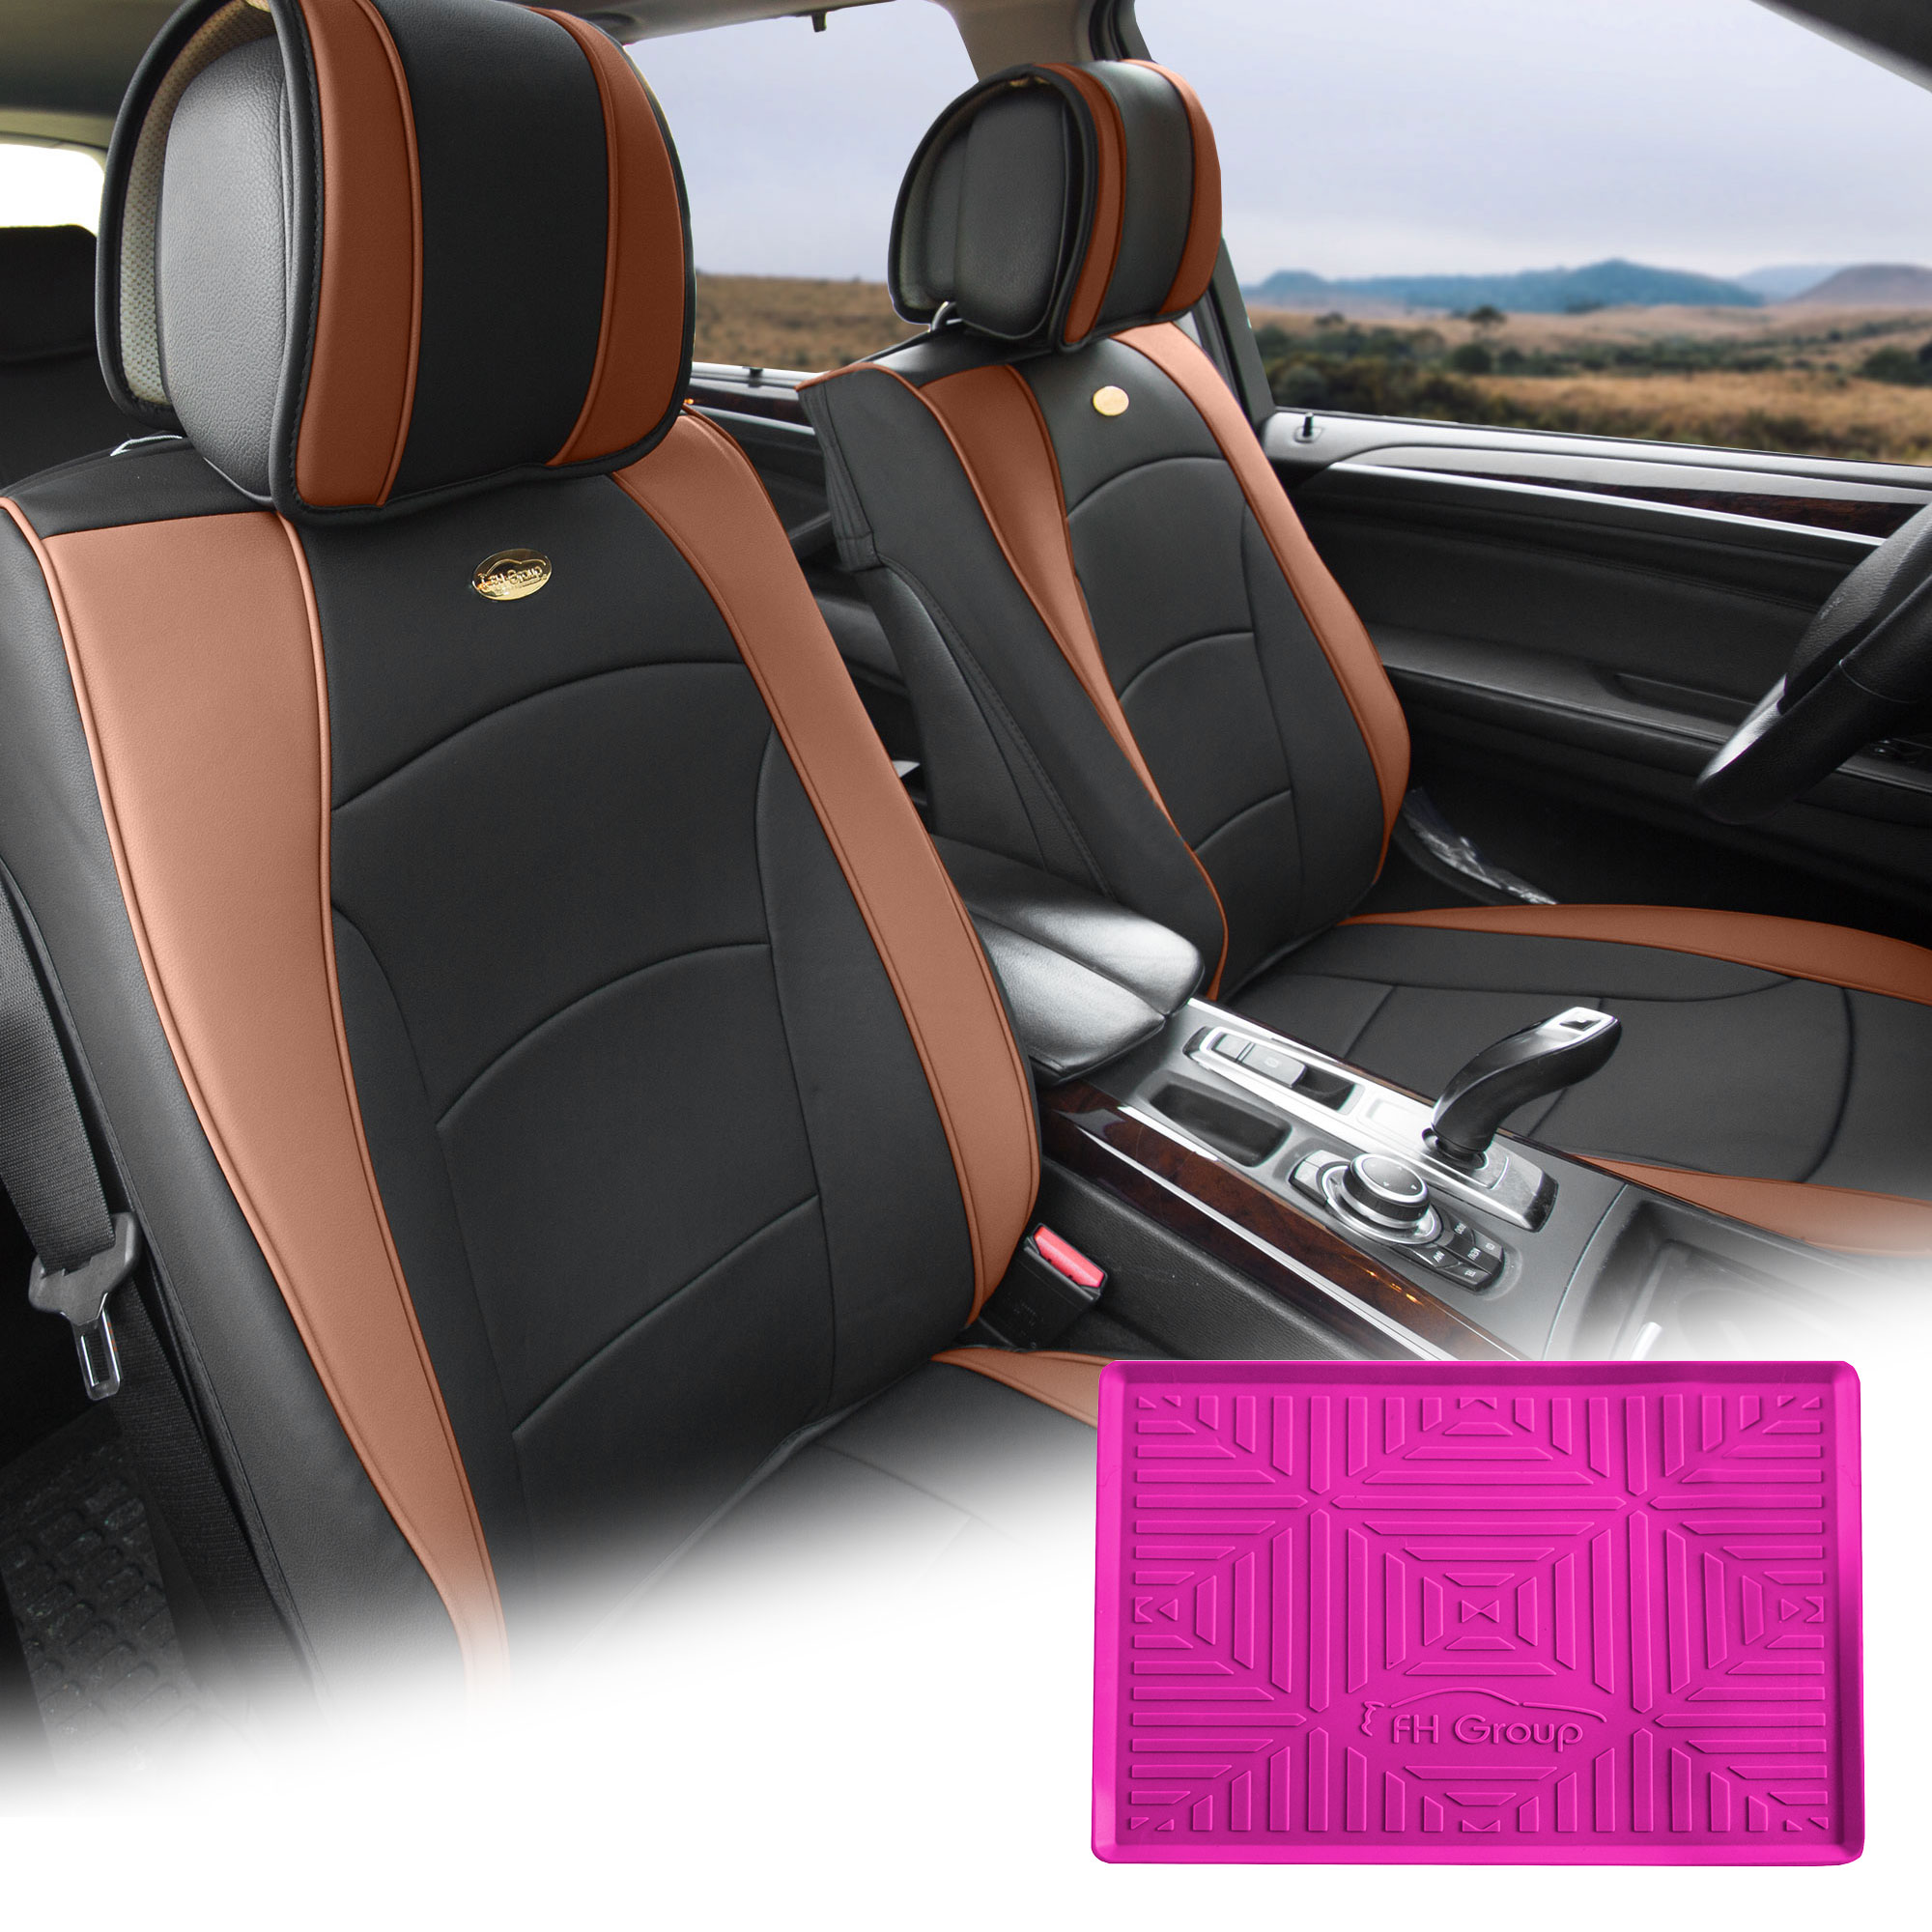 FH Group Brown Black Leatherette Front Bucket Seat Cushion Covers for Auto Car SUV Truck Van with Hot Pink Dash Mat